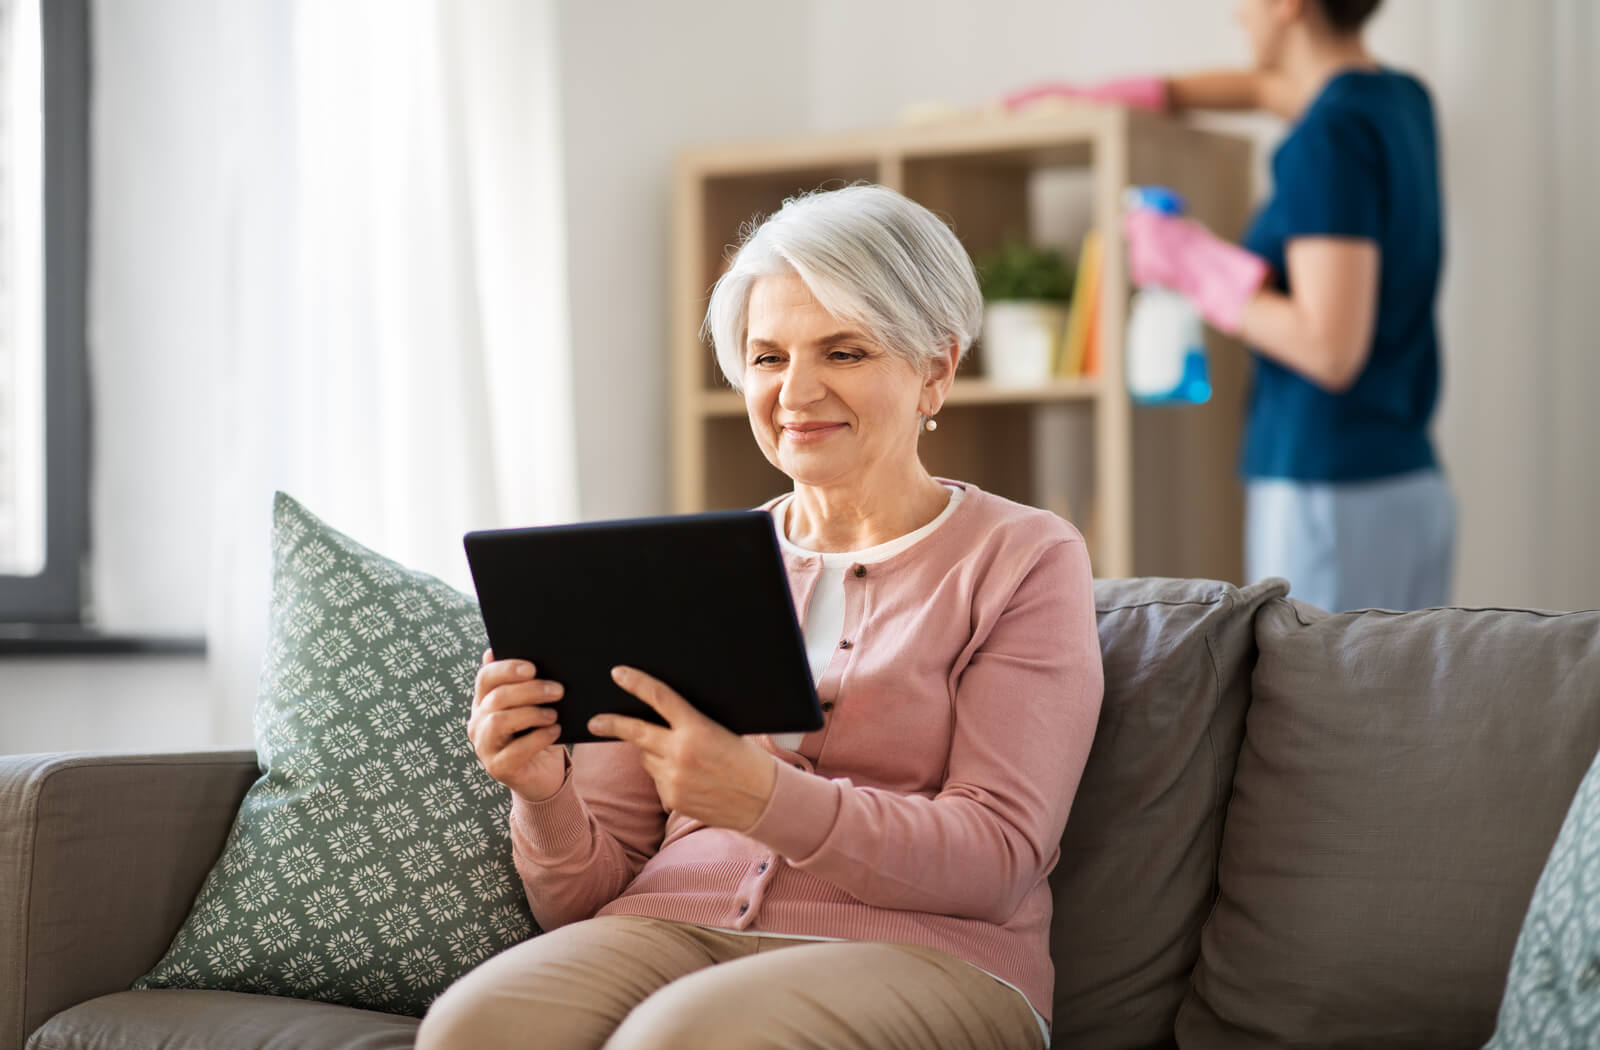 A senior woman sits on a couch while looking at a tablet while in the background someone dusts a cabinet.